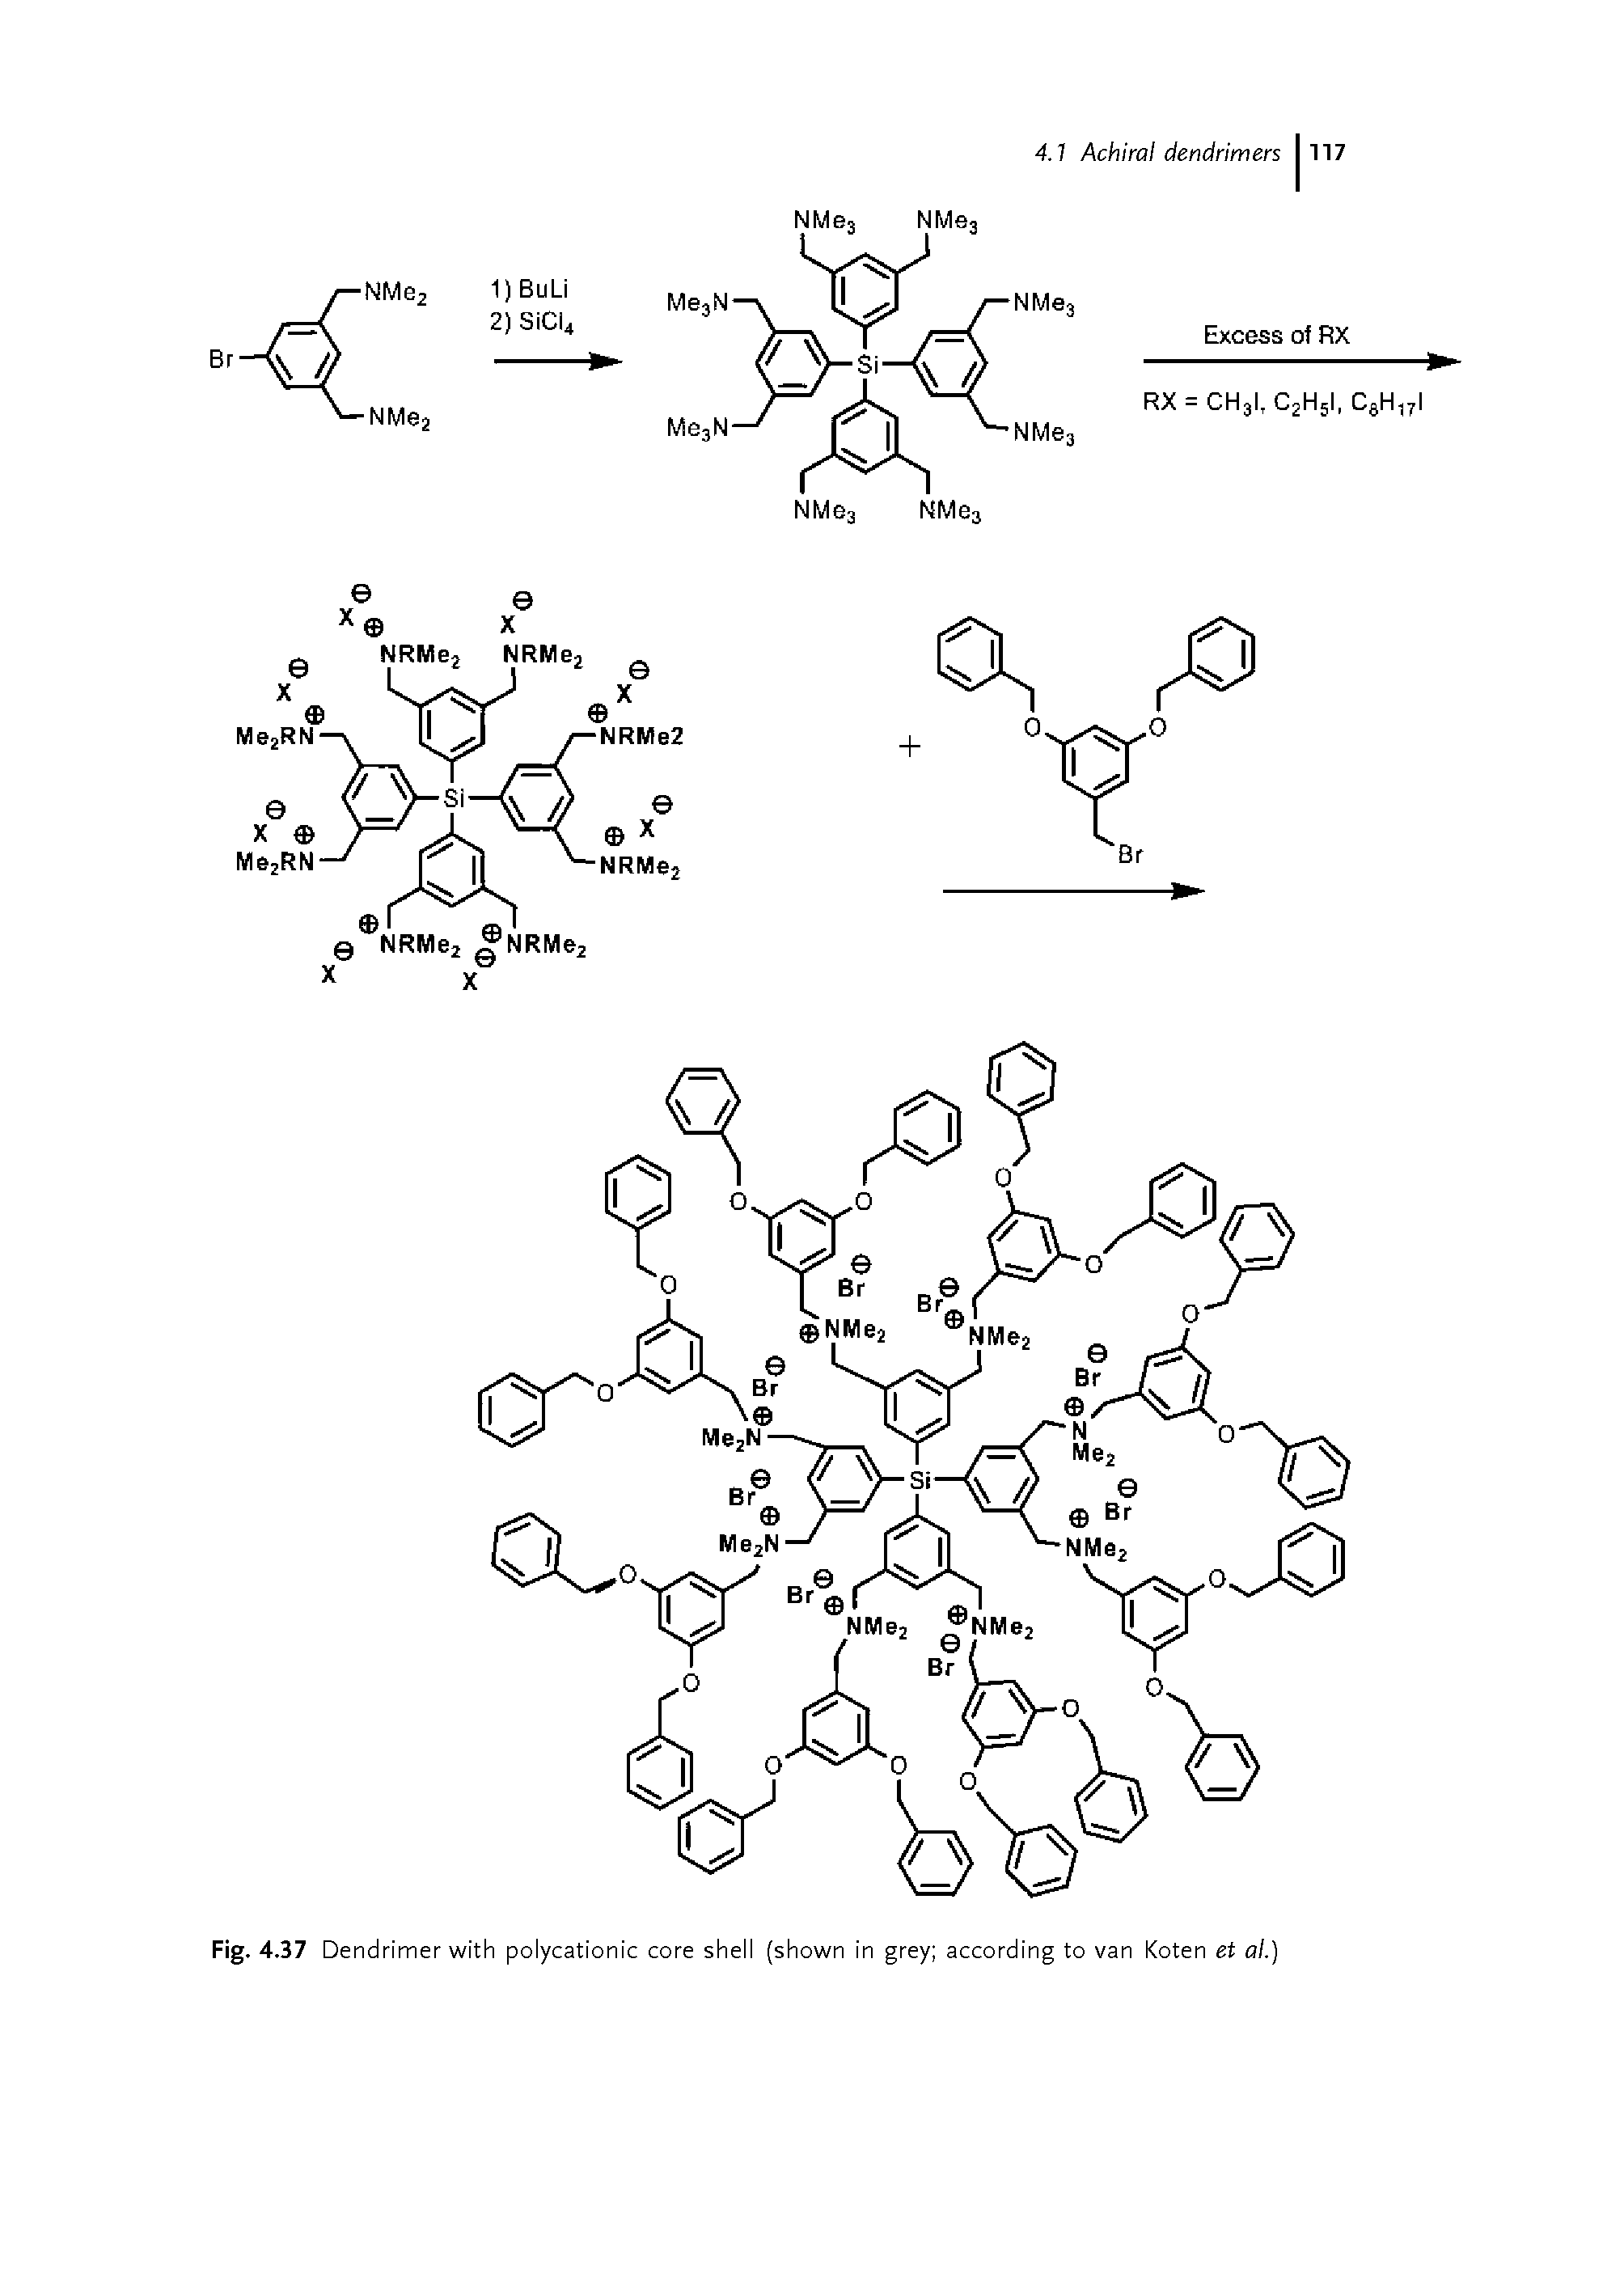 Fig. 4.37 Dendrimer with polycationic core shell (shown in grey according to van Koten et al.)...